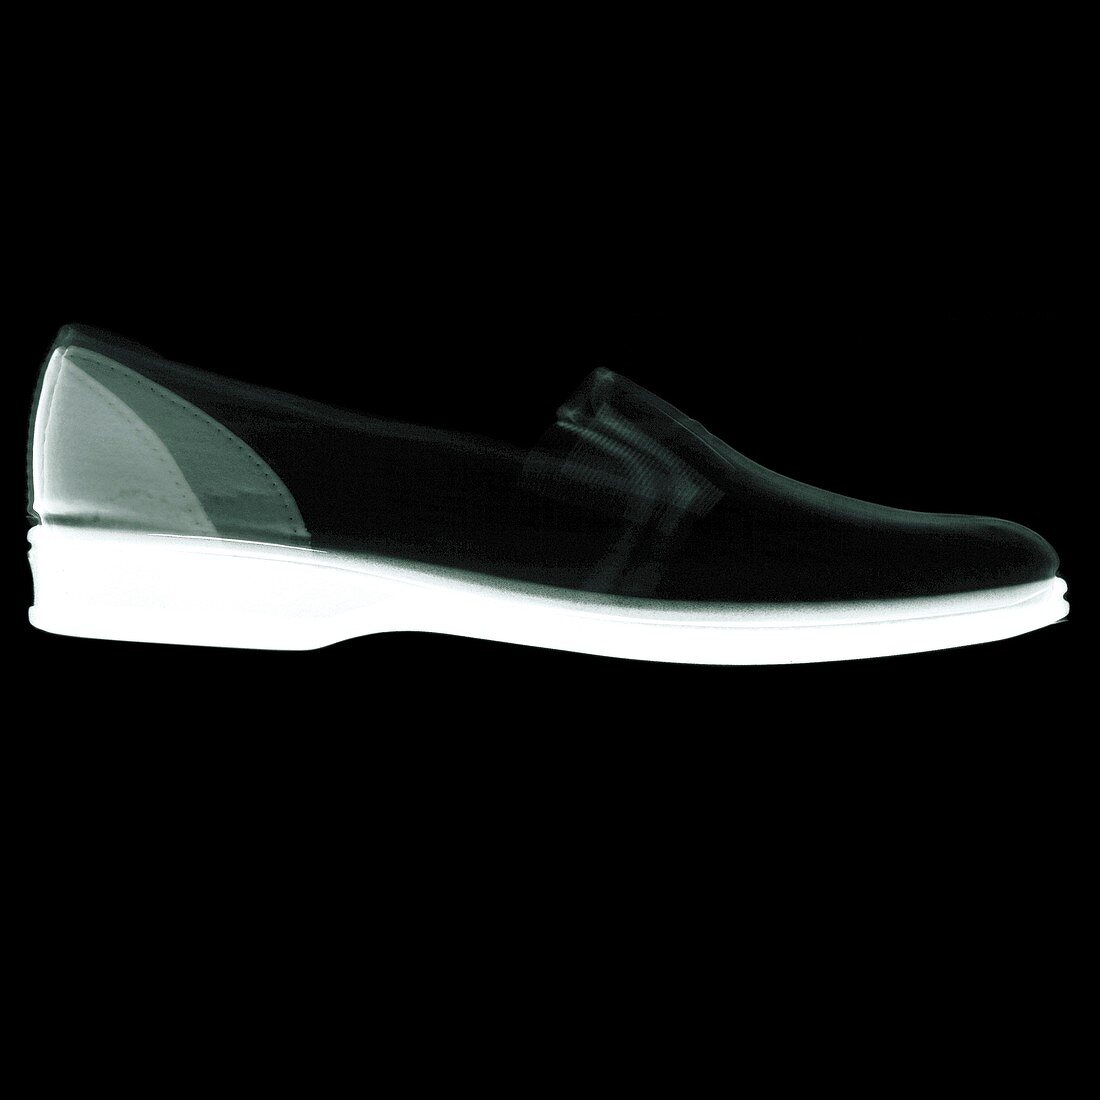 Loafer shoe, X-ray